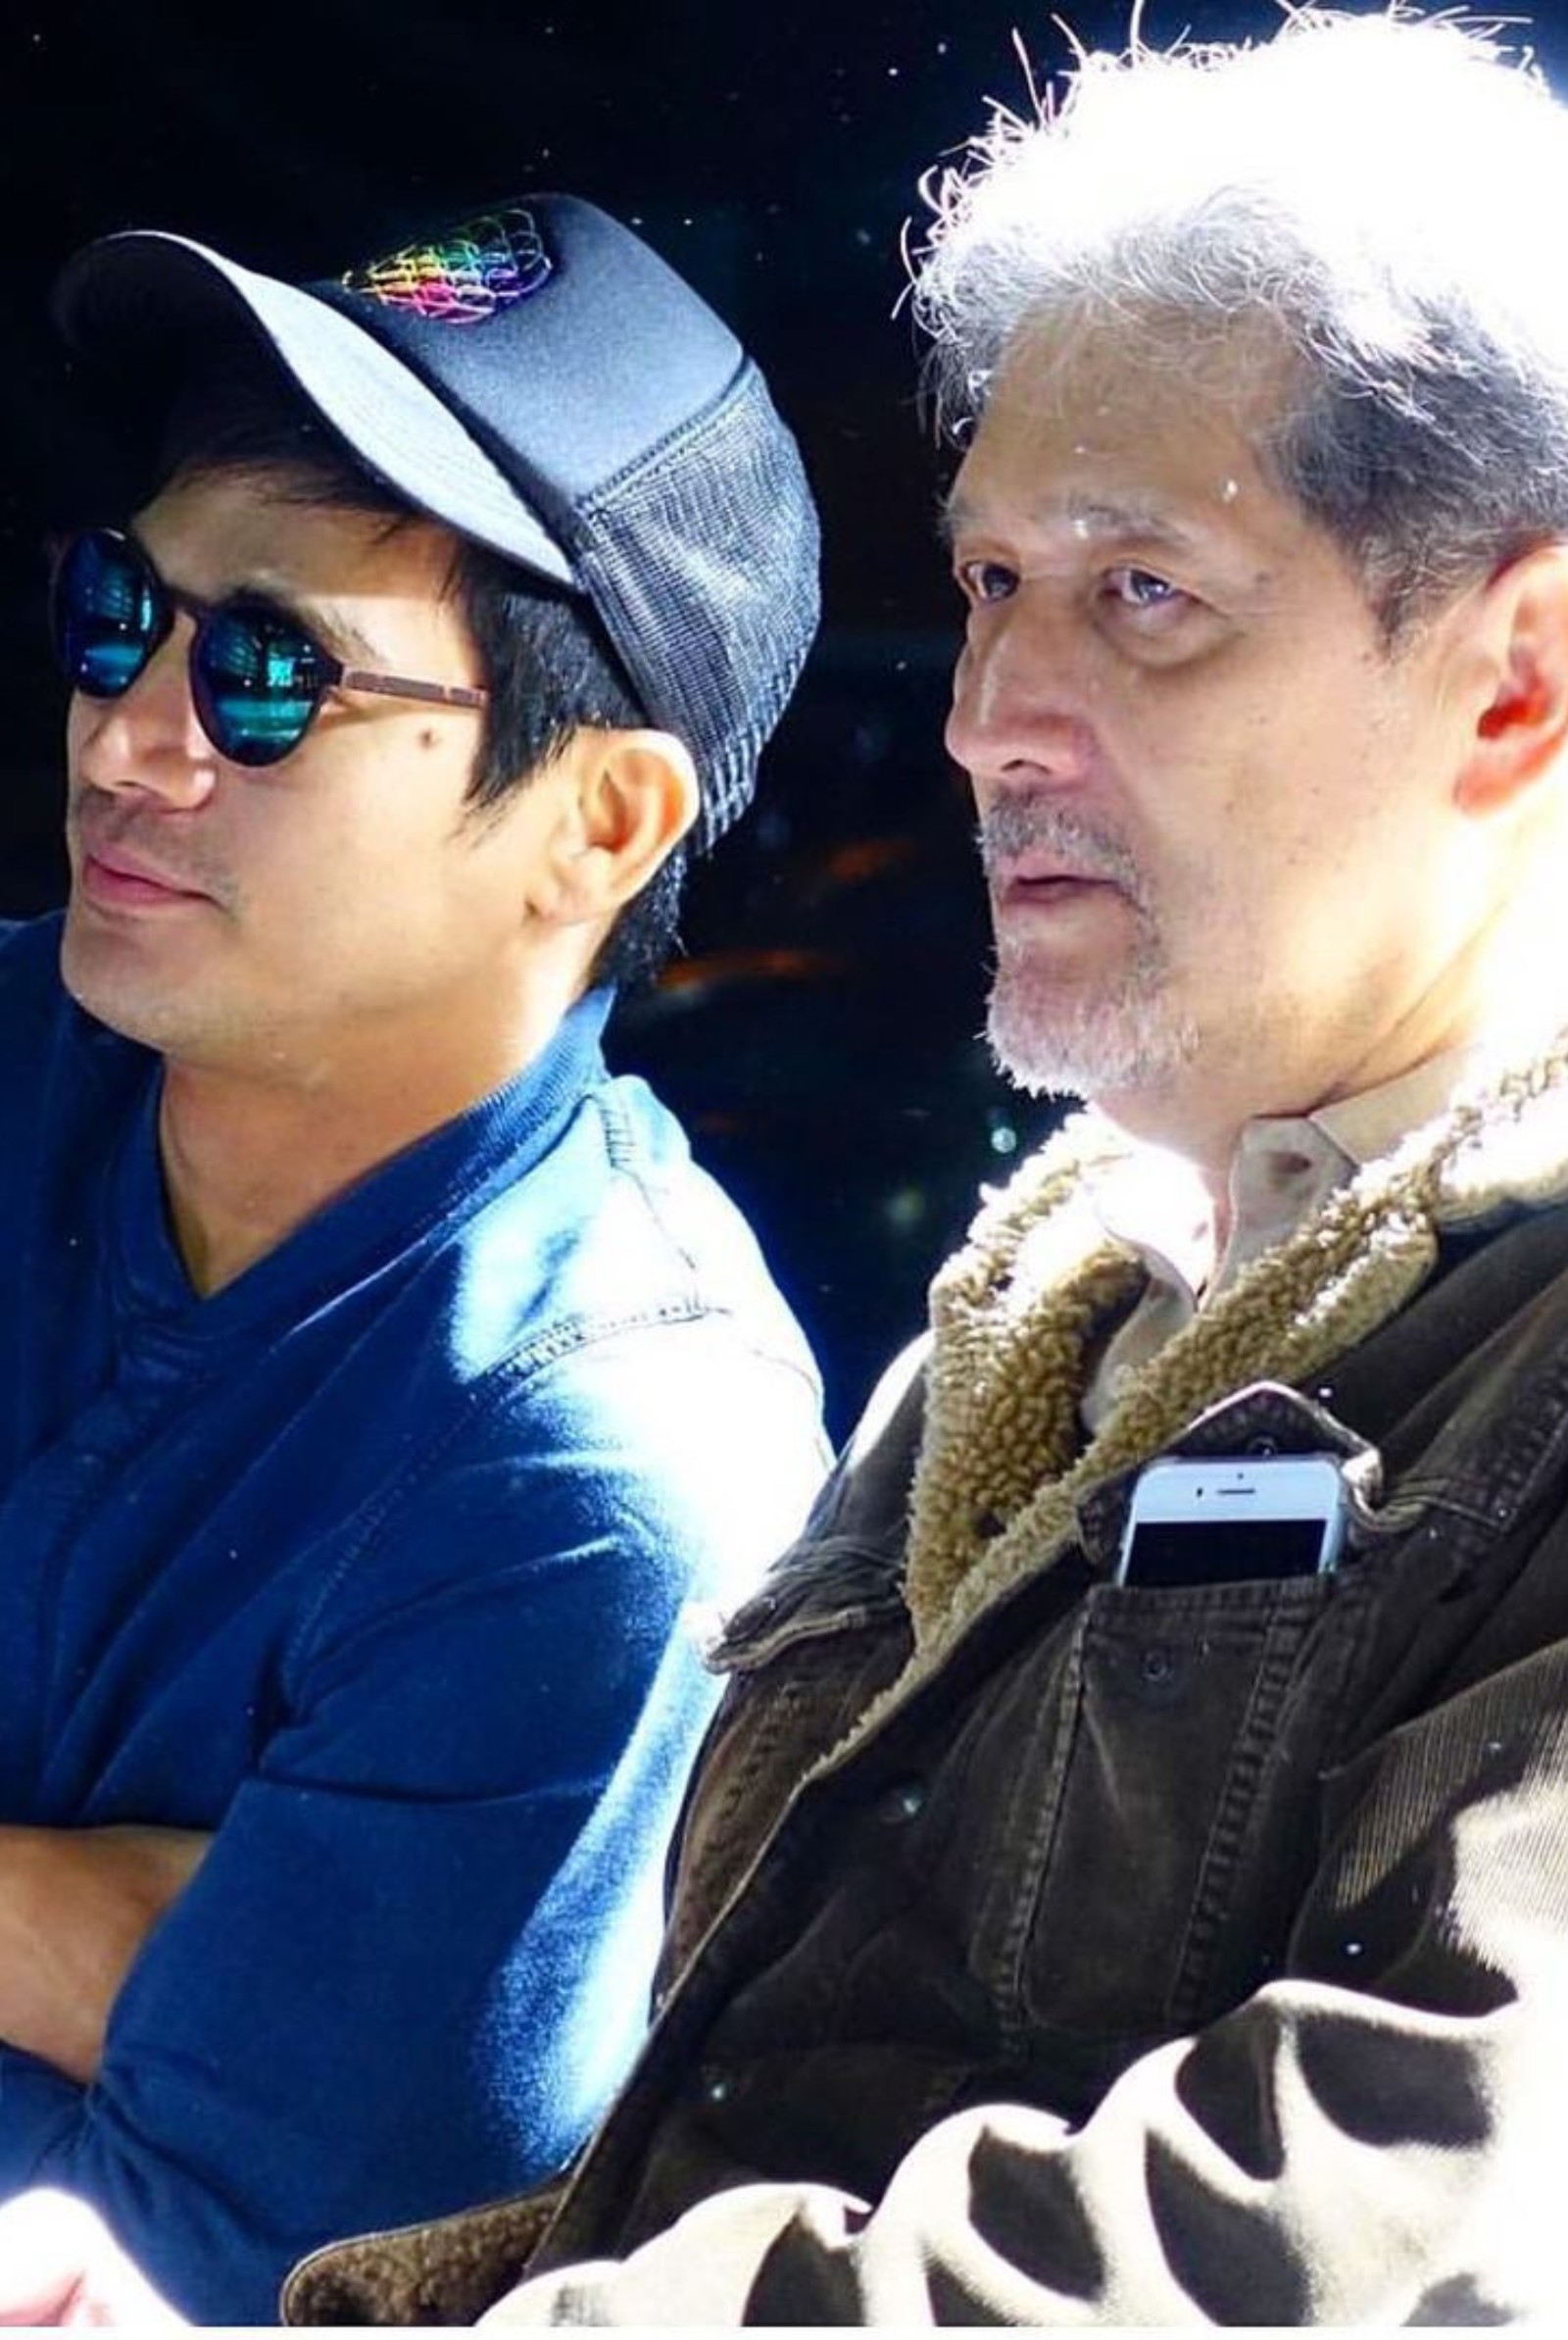 Johnny "Mr. M" Manahan and Piolo Pascual